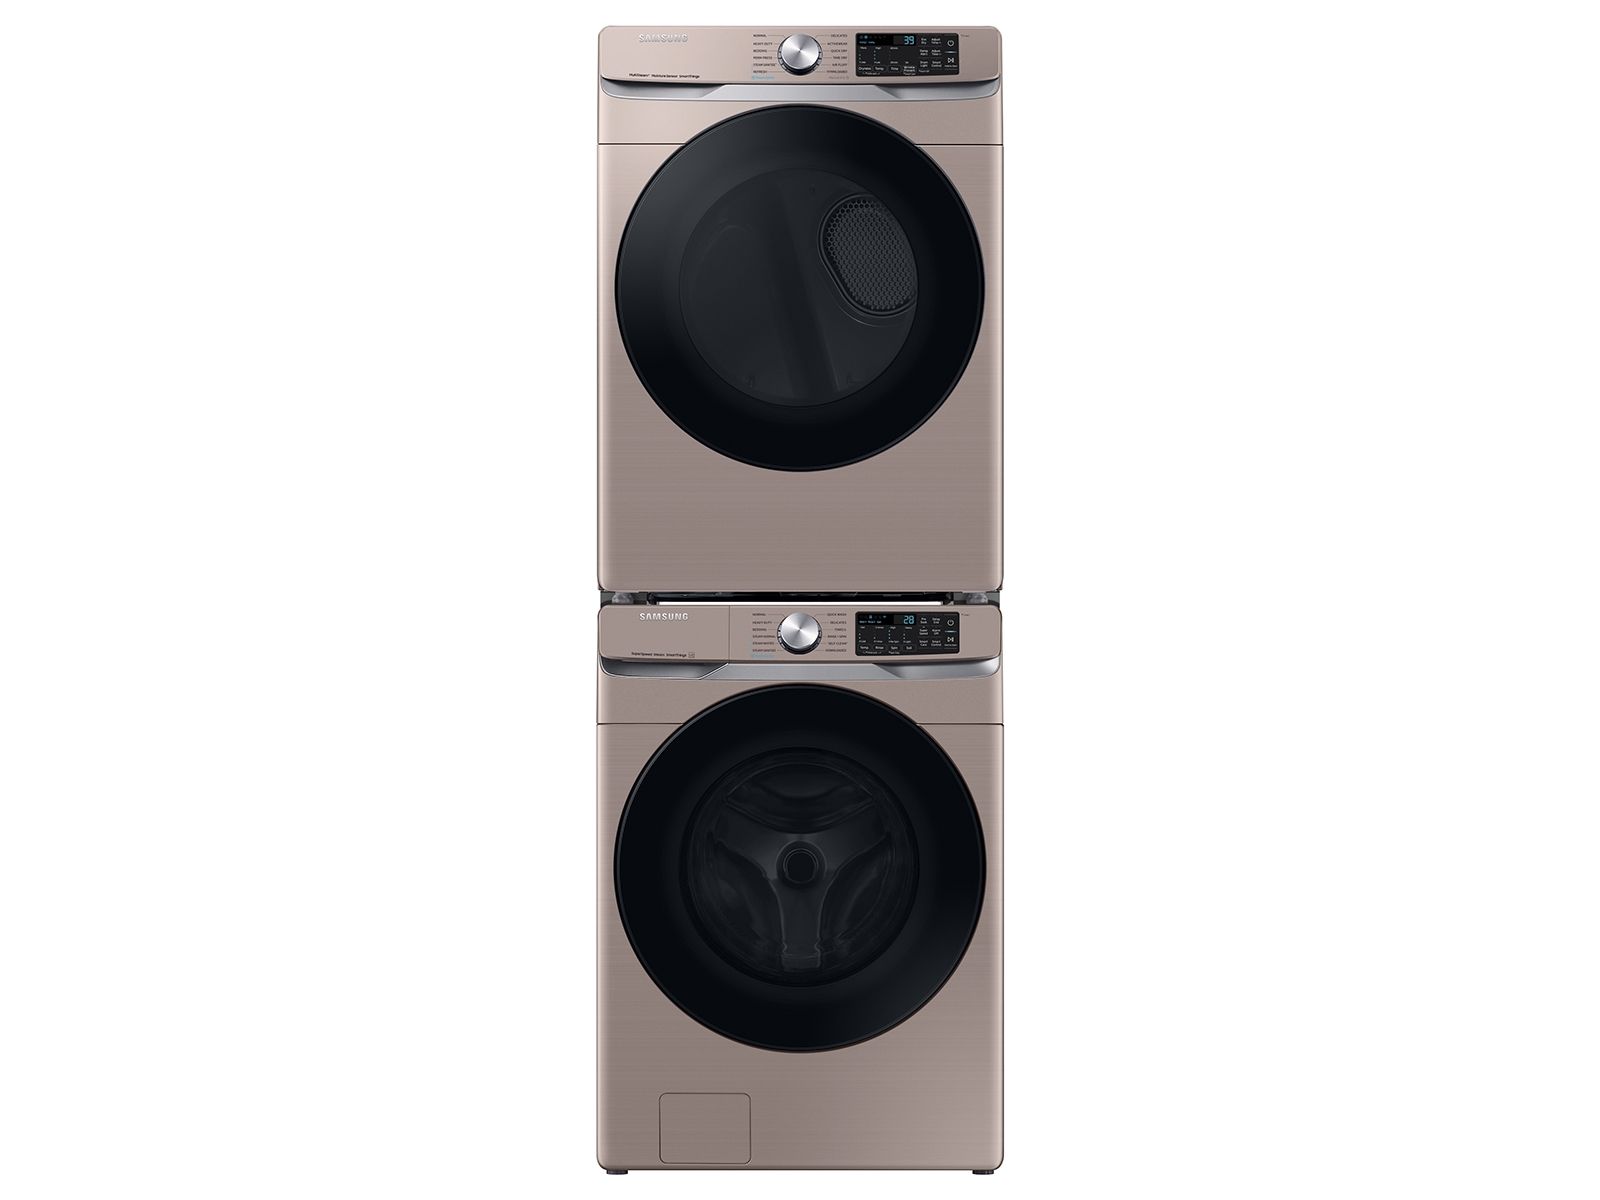 LG 27 inch Smart Front Load Washer with 4.5 Cu. ft.